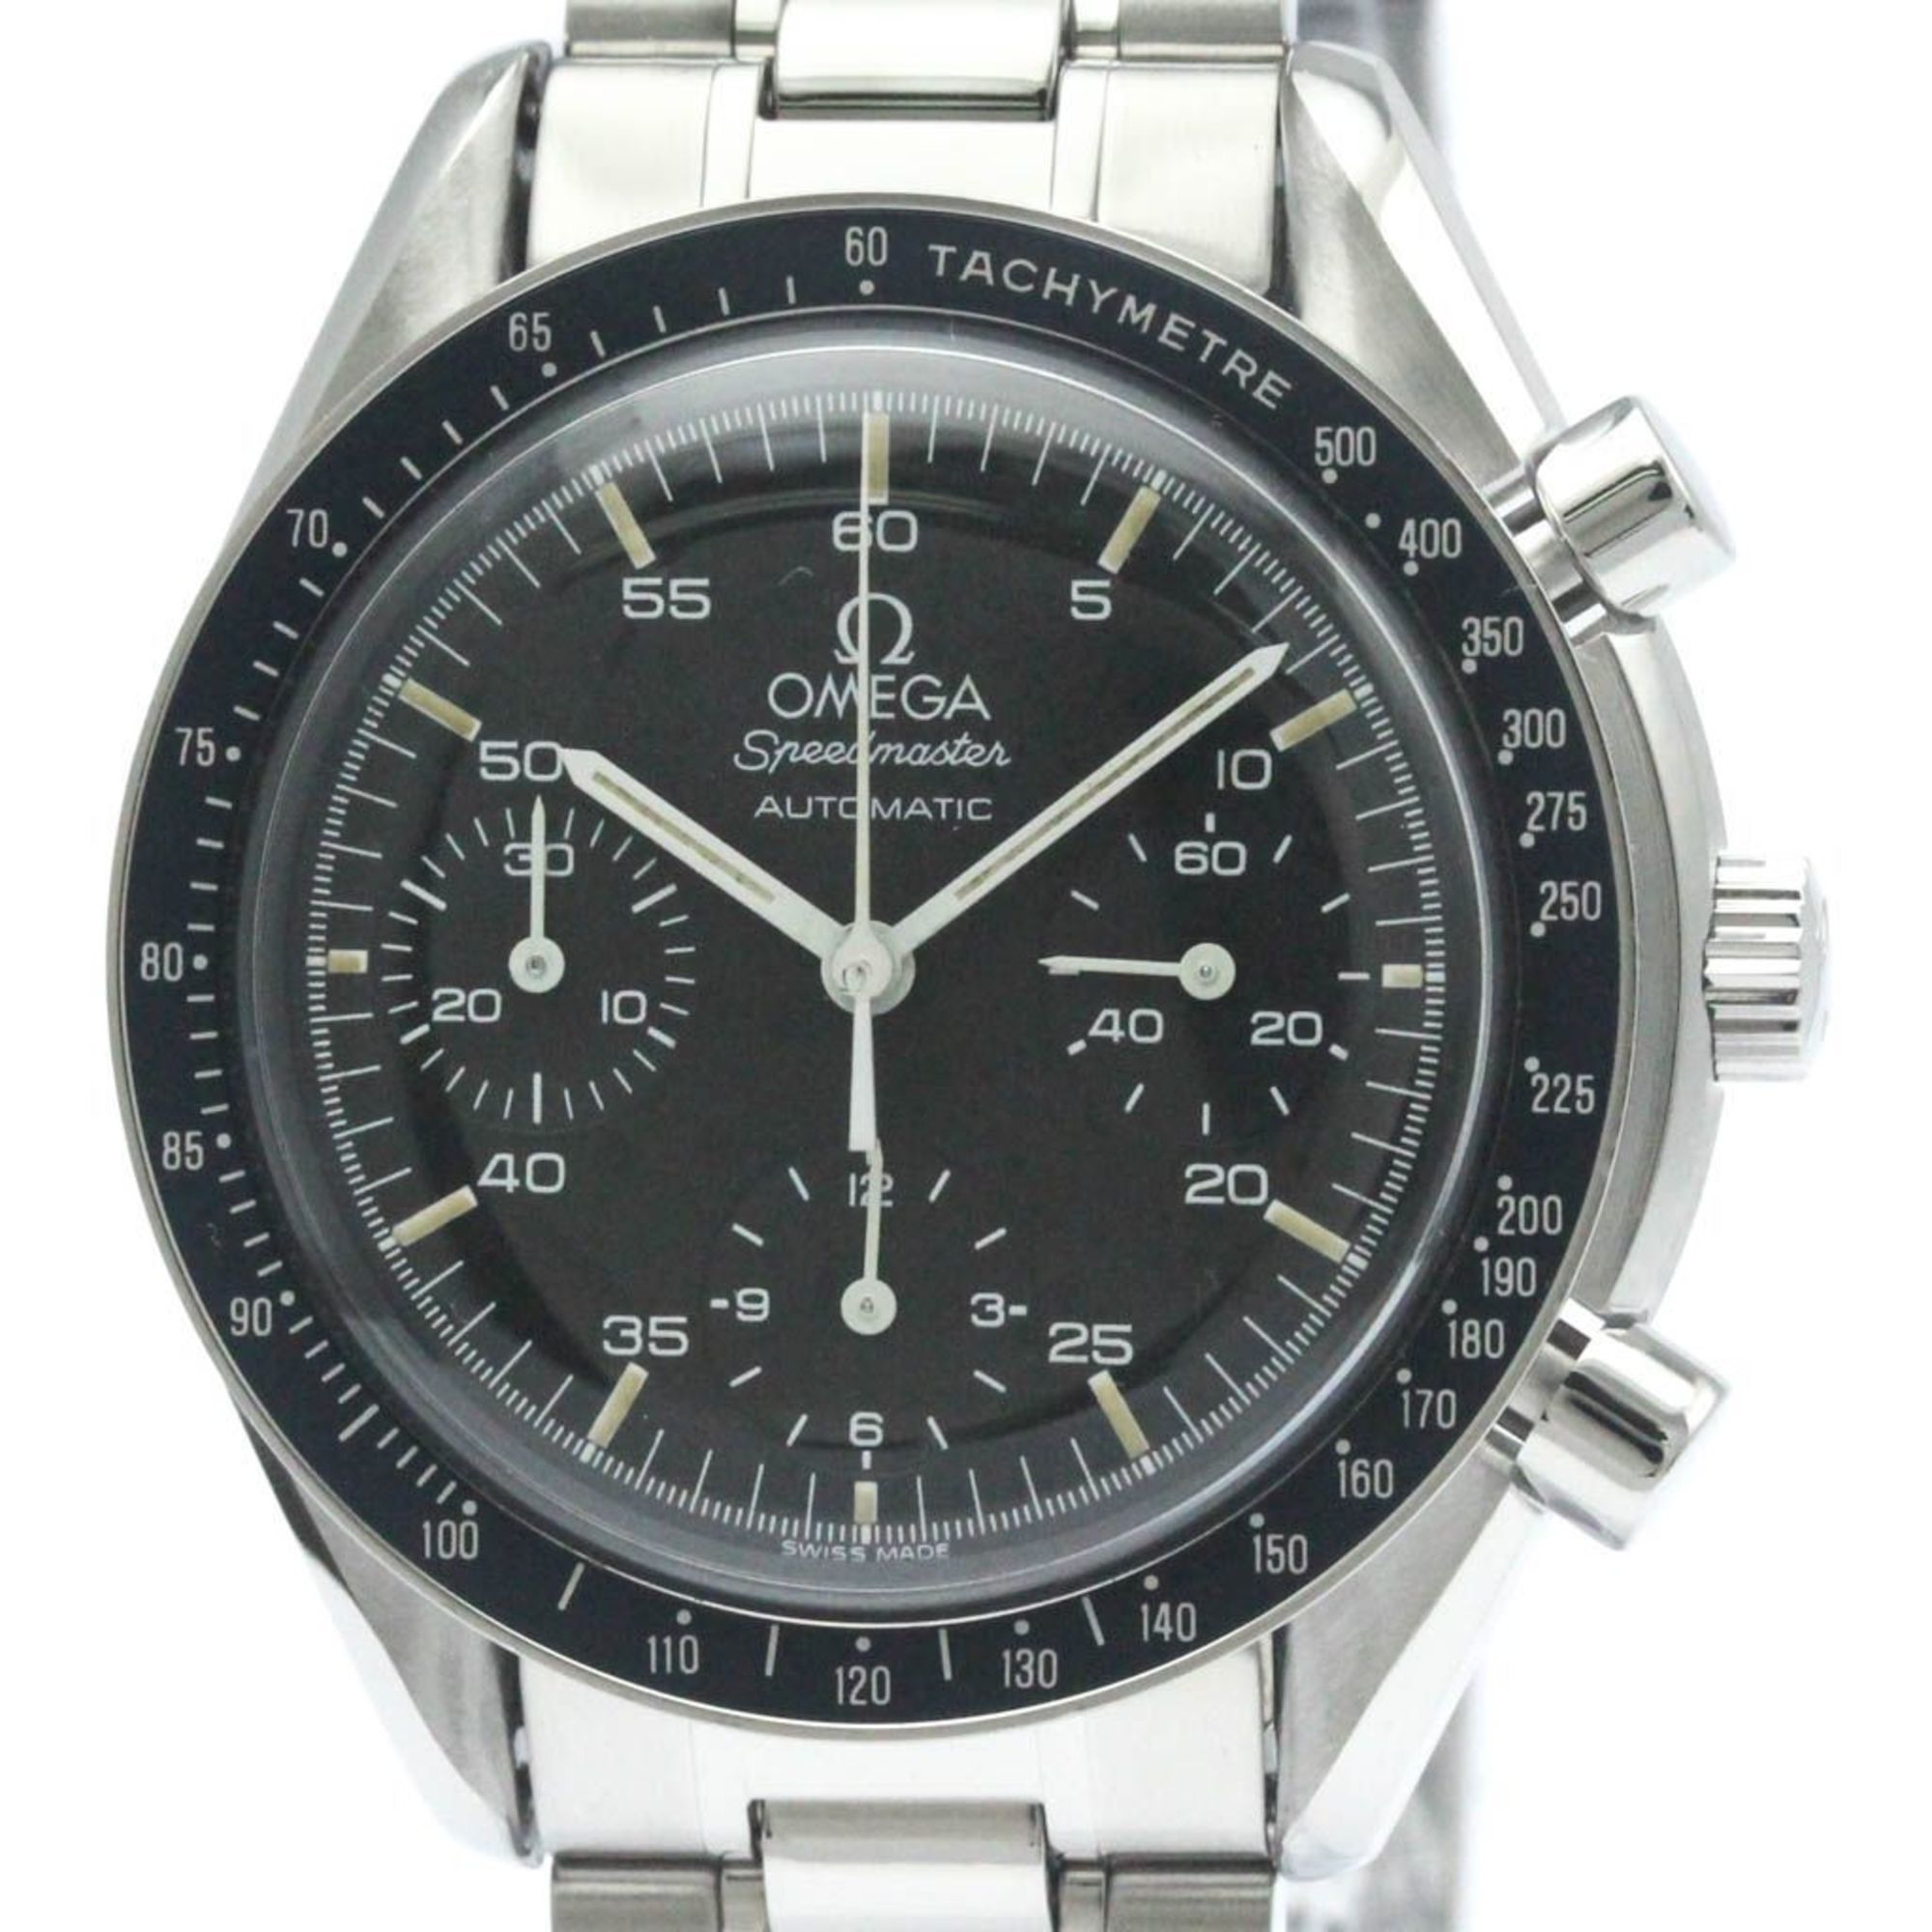 Polished OMEGA Speedmaster Automatic Steel Mens Watch 3510.50 BF567911